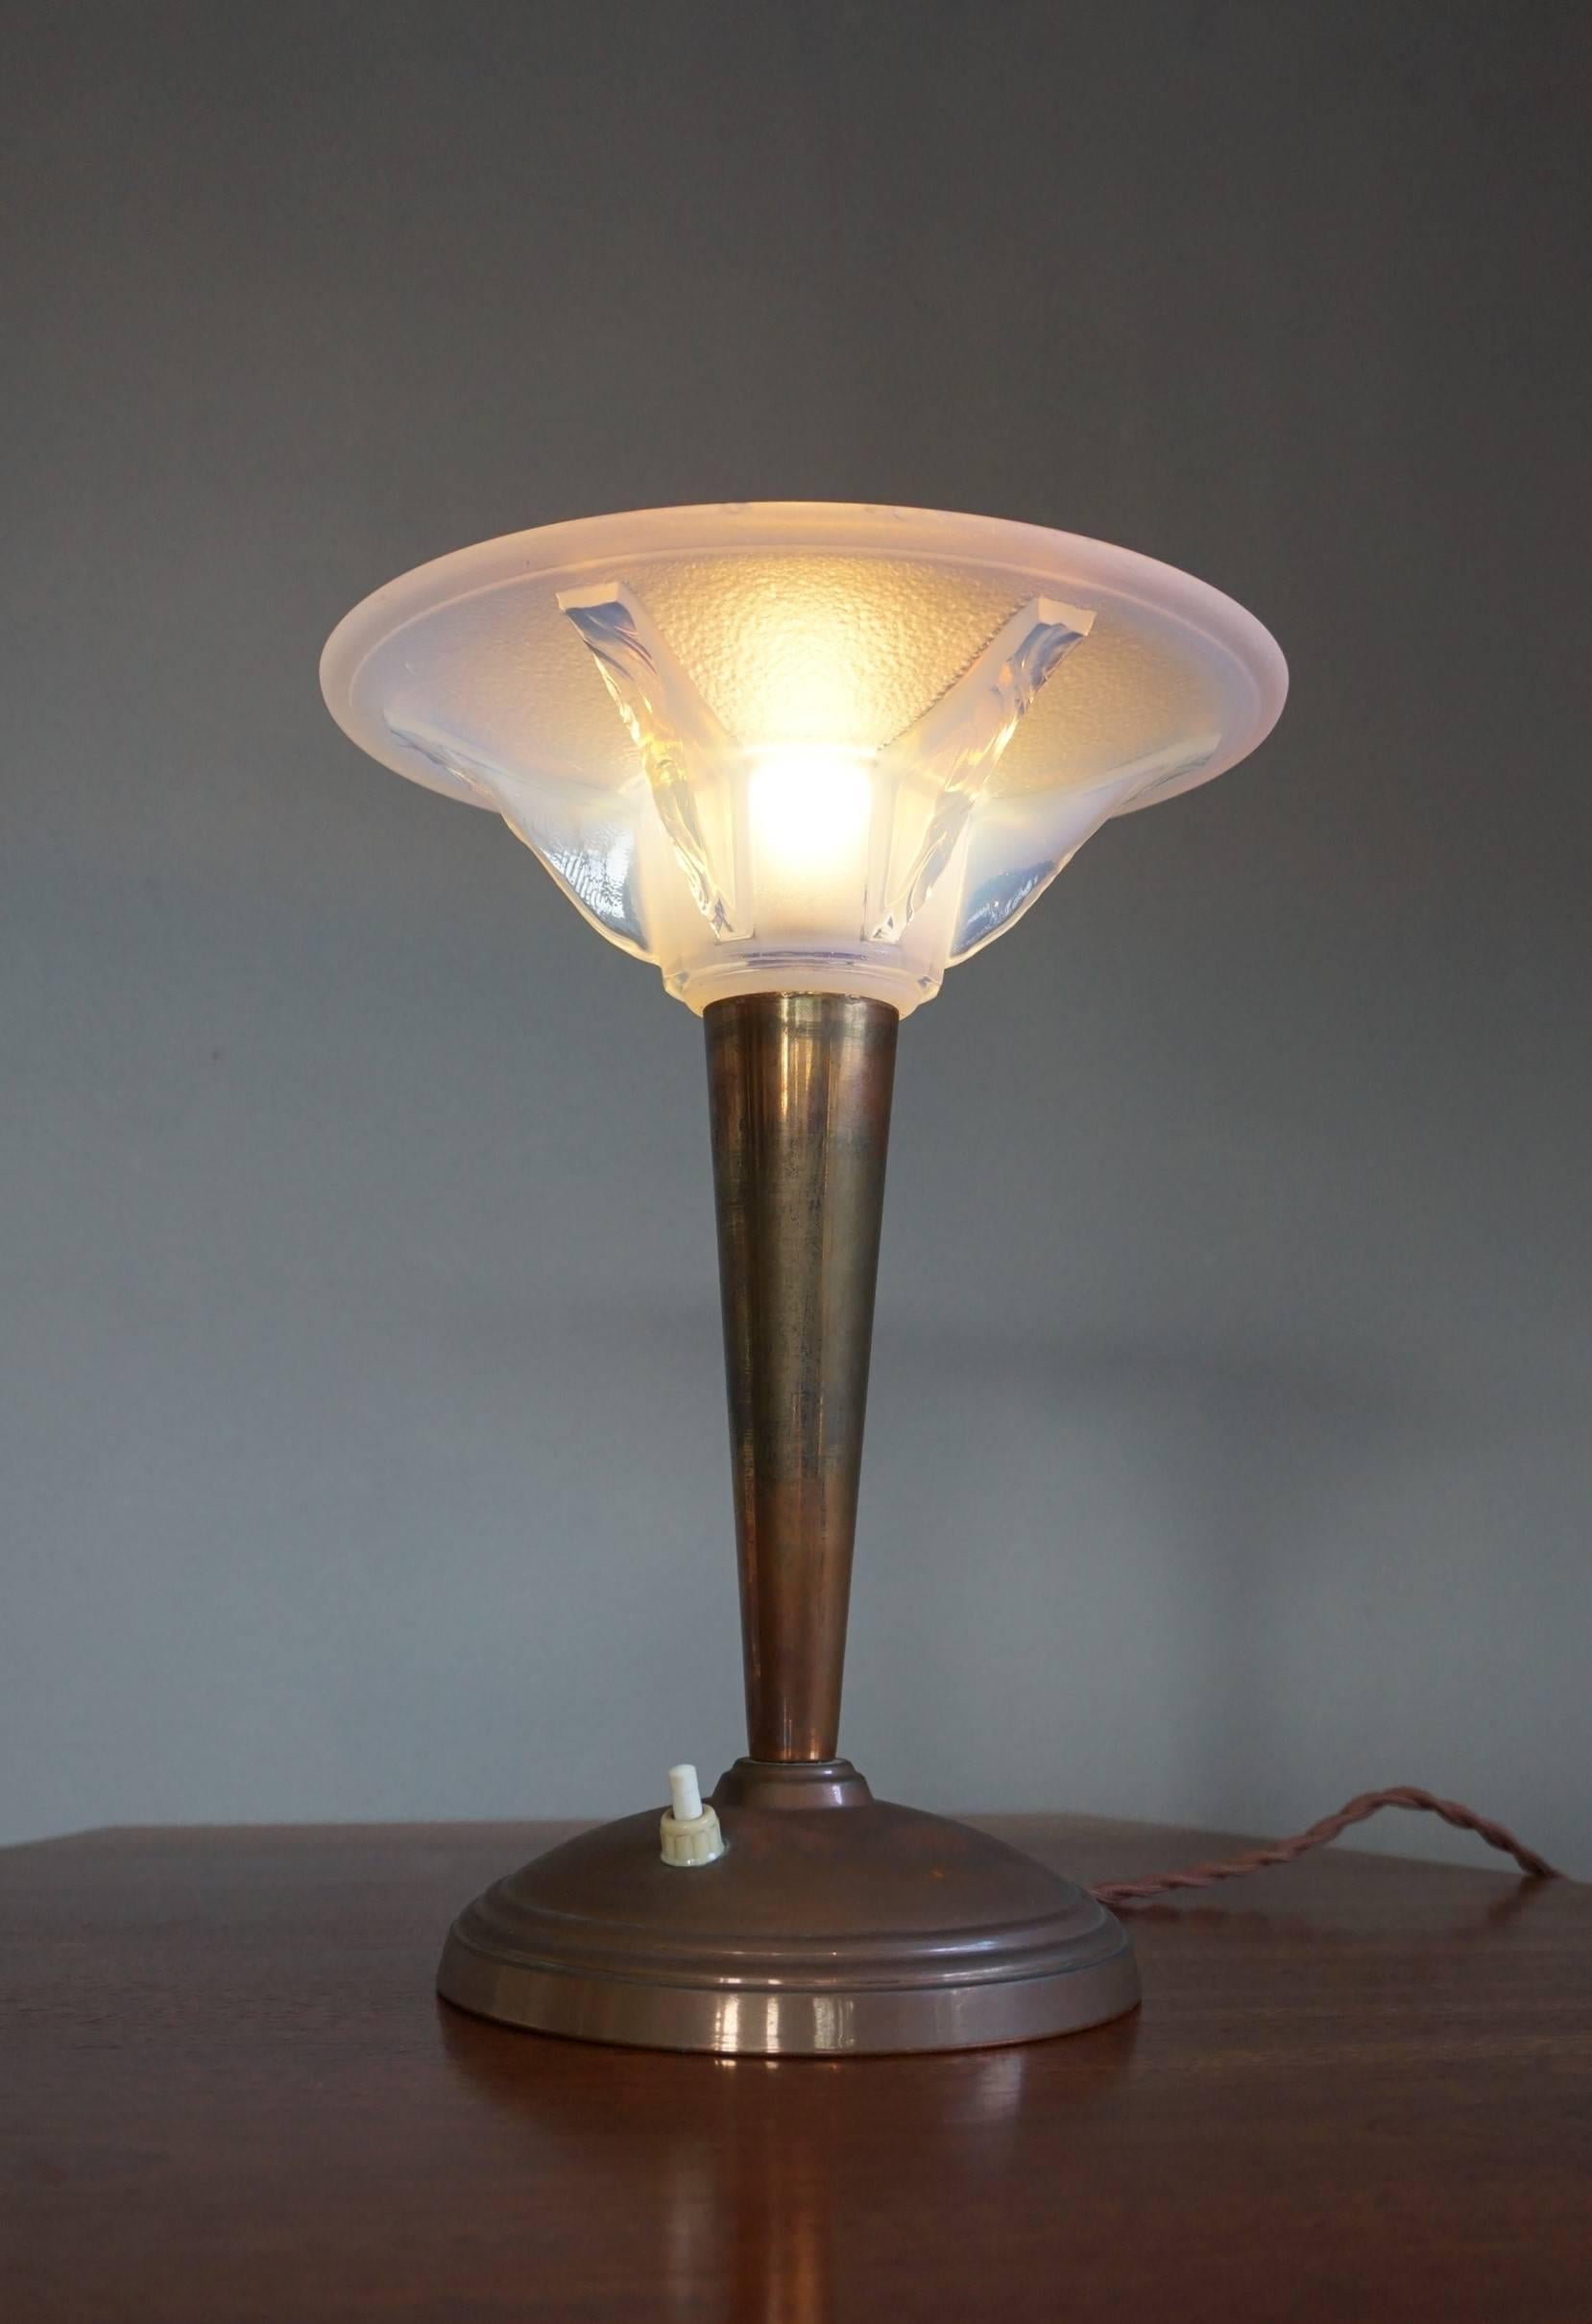 Rare 1920s brass lamp with a René Lalique style shade.

Thanks to the stunning glass shade this table or desk lamp radiates the most beautiful light imaginable. The design is simply breath taking and the combination of the patinated brass and the